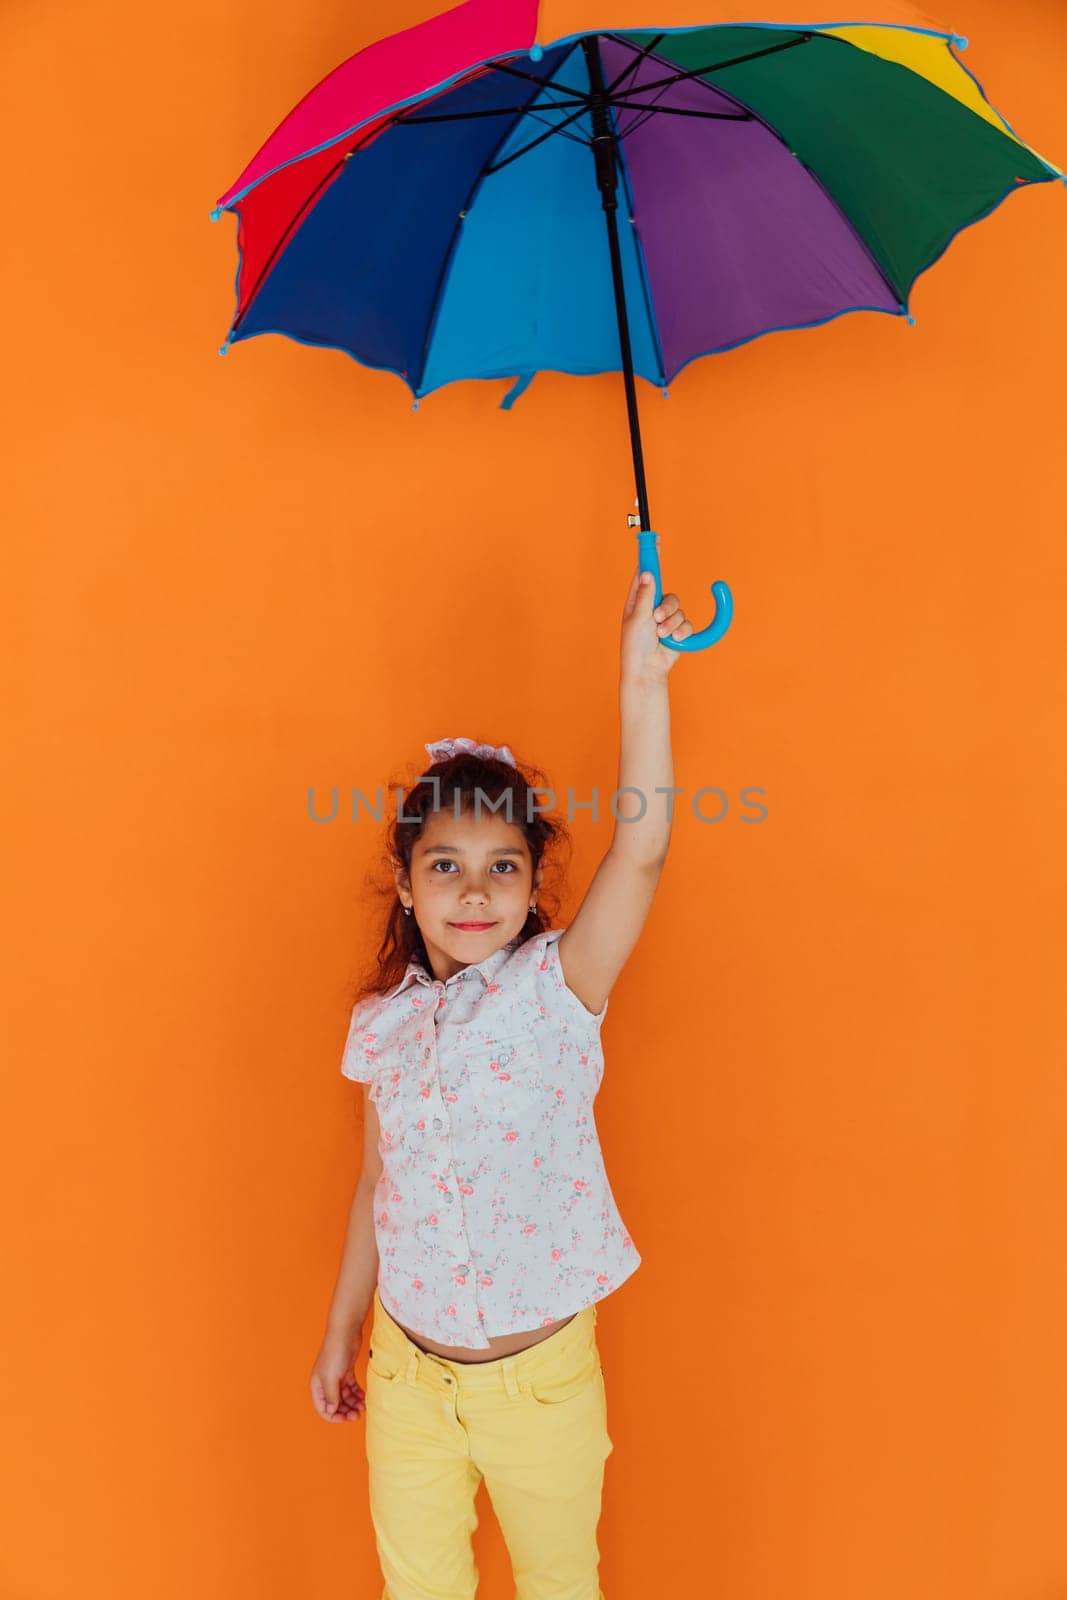 Little girl with colorful umbrella on orange background by Simakov